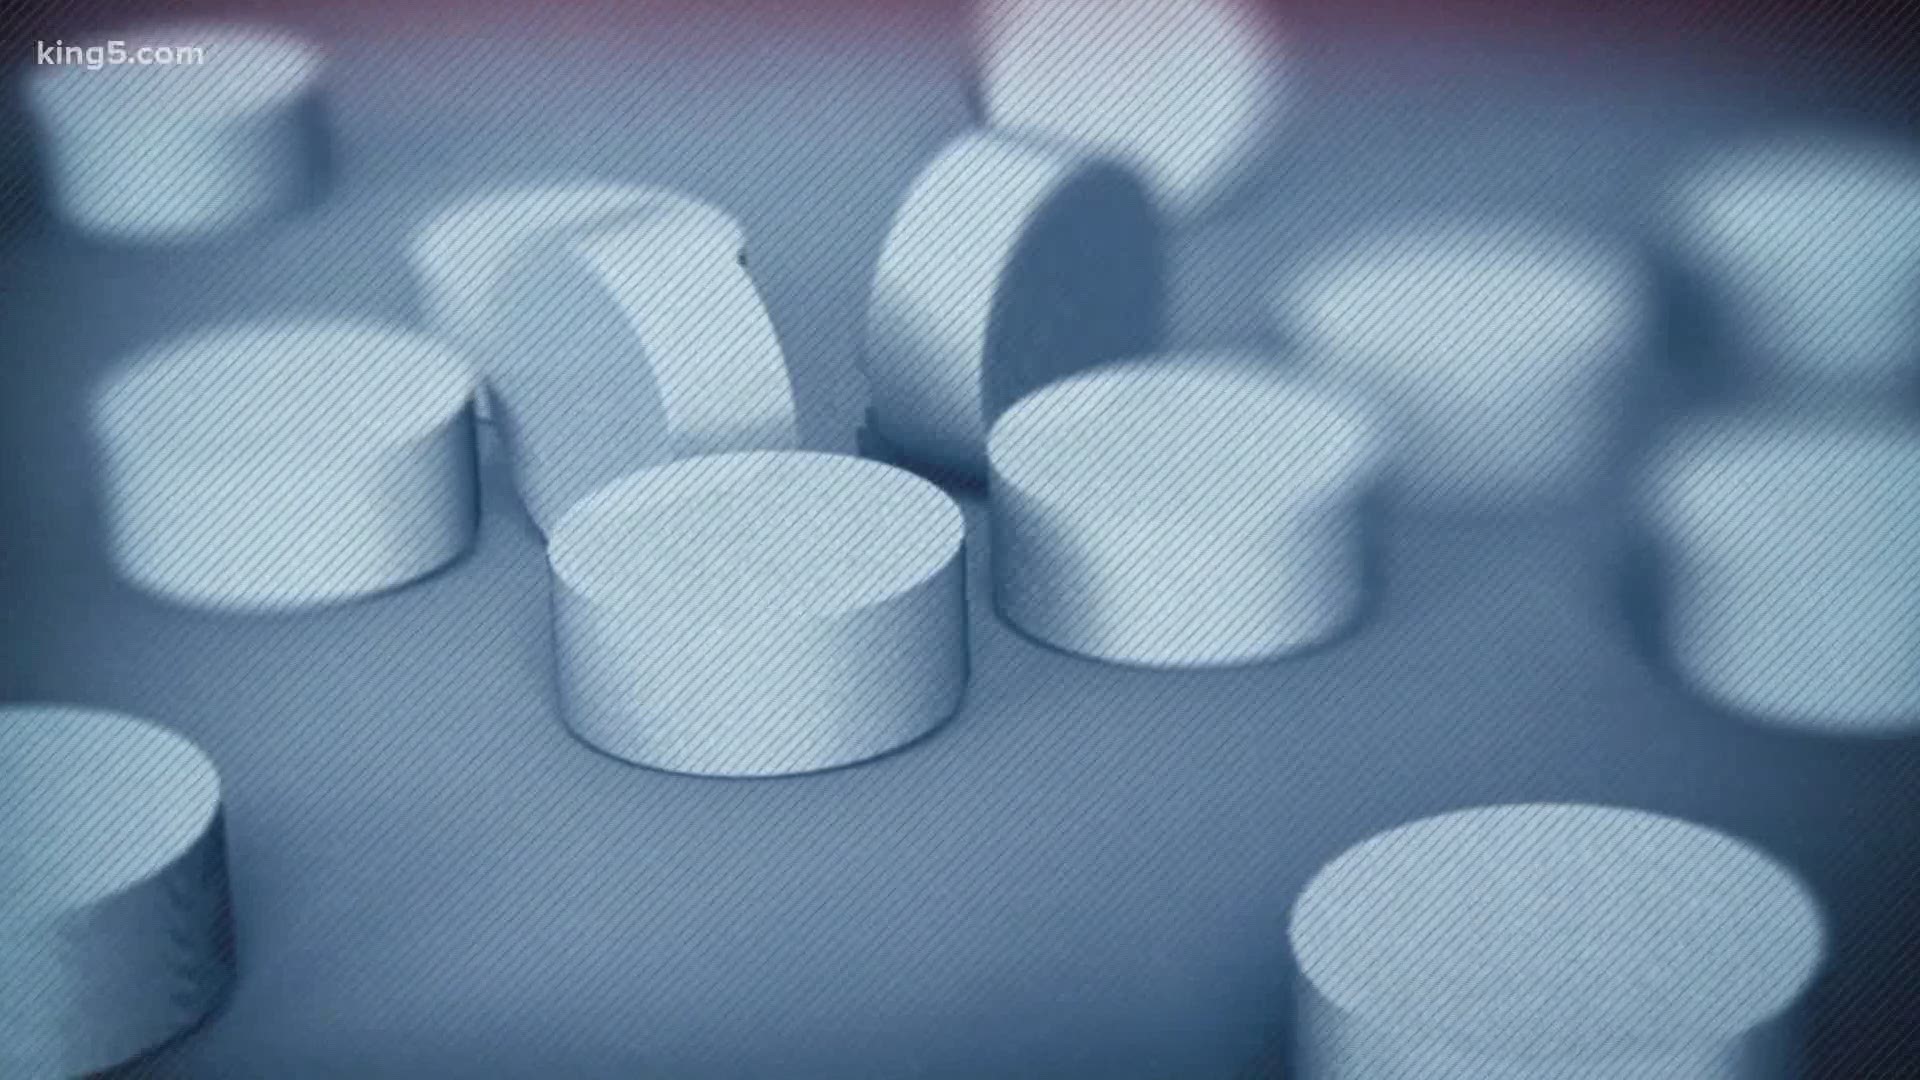 Stress associated with the pandemic has caused drug abuse and relapses, according to behavioral health officials in Snohomish County.